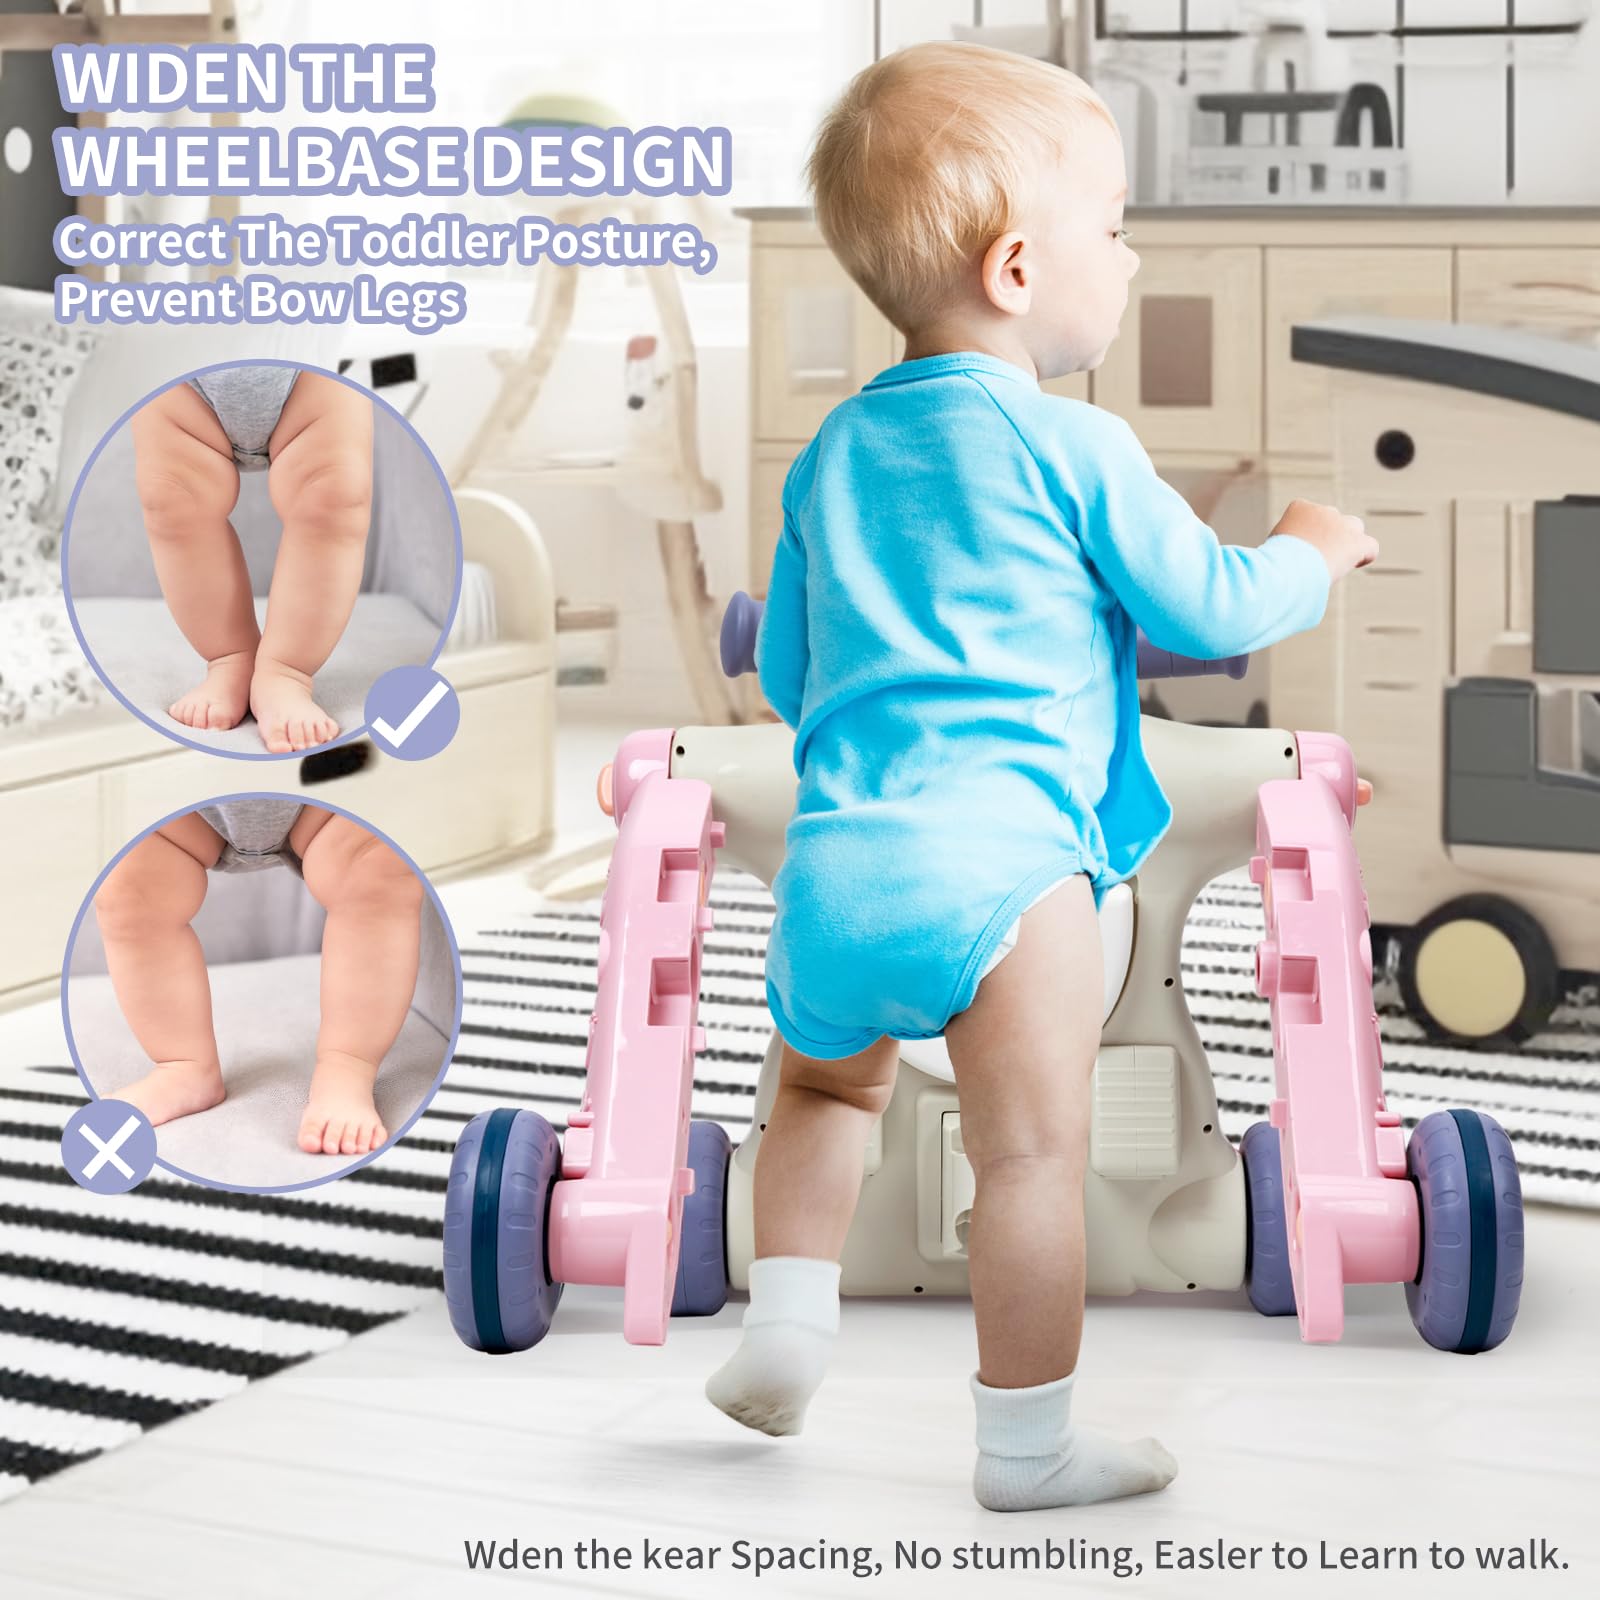 LemoHome Baby Walker,Baby Push Walker,Baby Sit-to-Stand Learning Walker,Could Assemble as Scooter,Motorbike,Detachable Panel,Activity Center,Musical Walking Toys for Infants